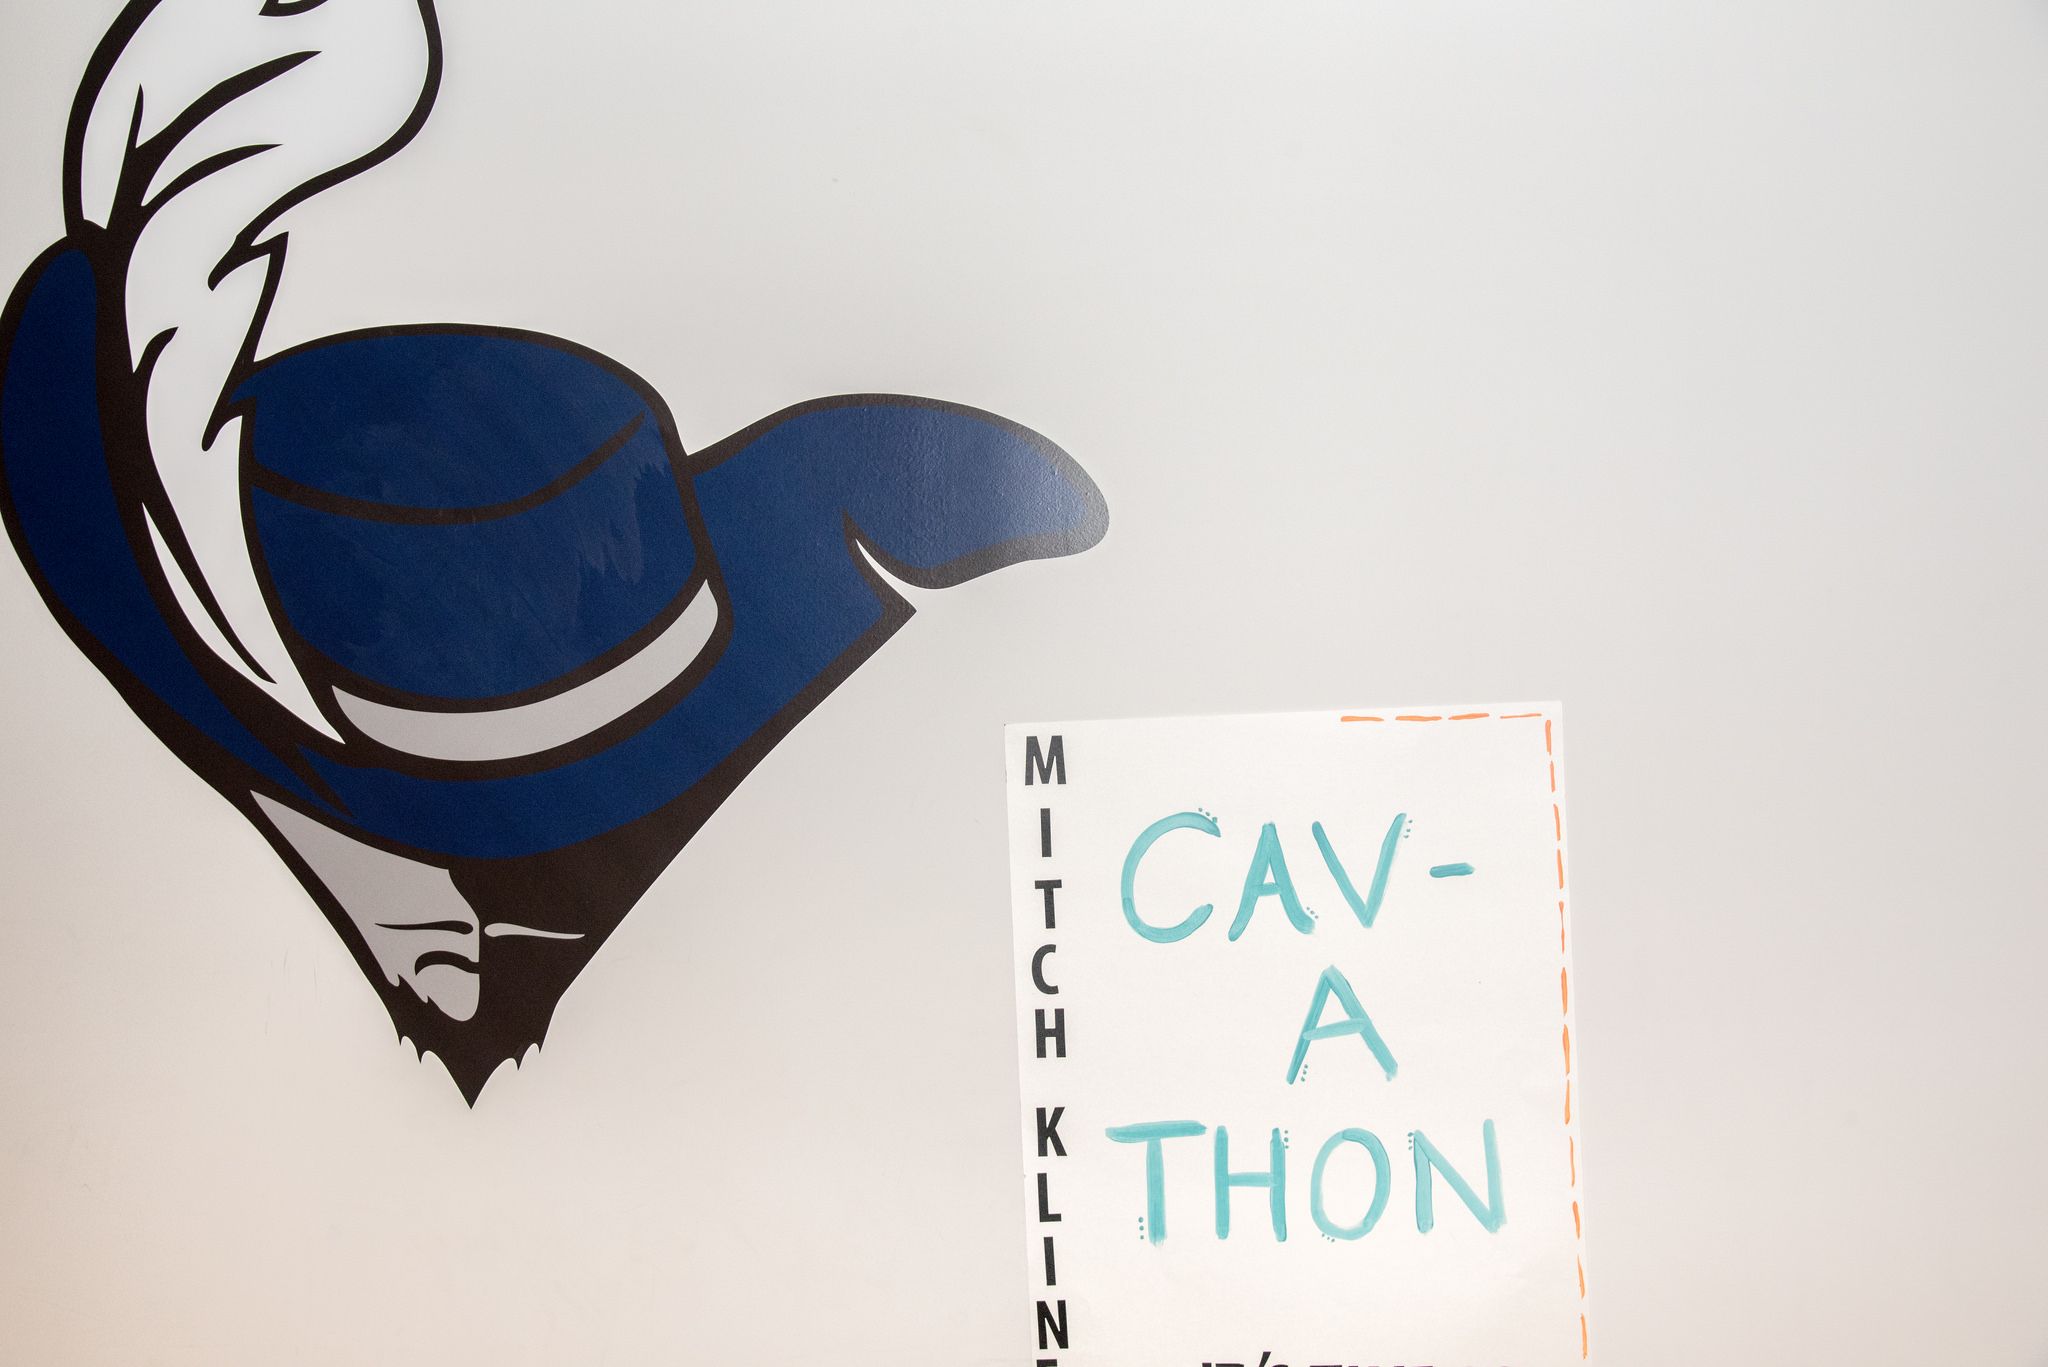 Above is an image taken at last year's Cav-a-thon.